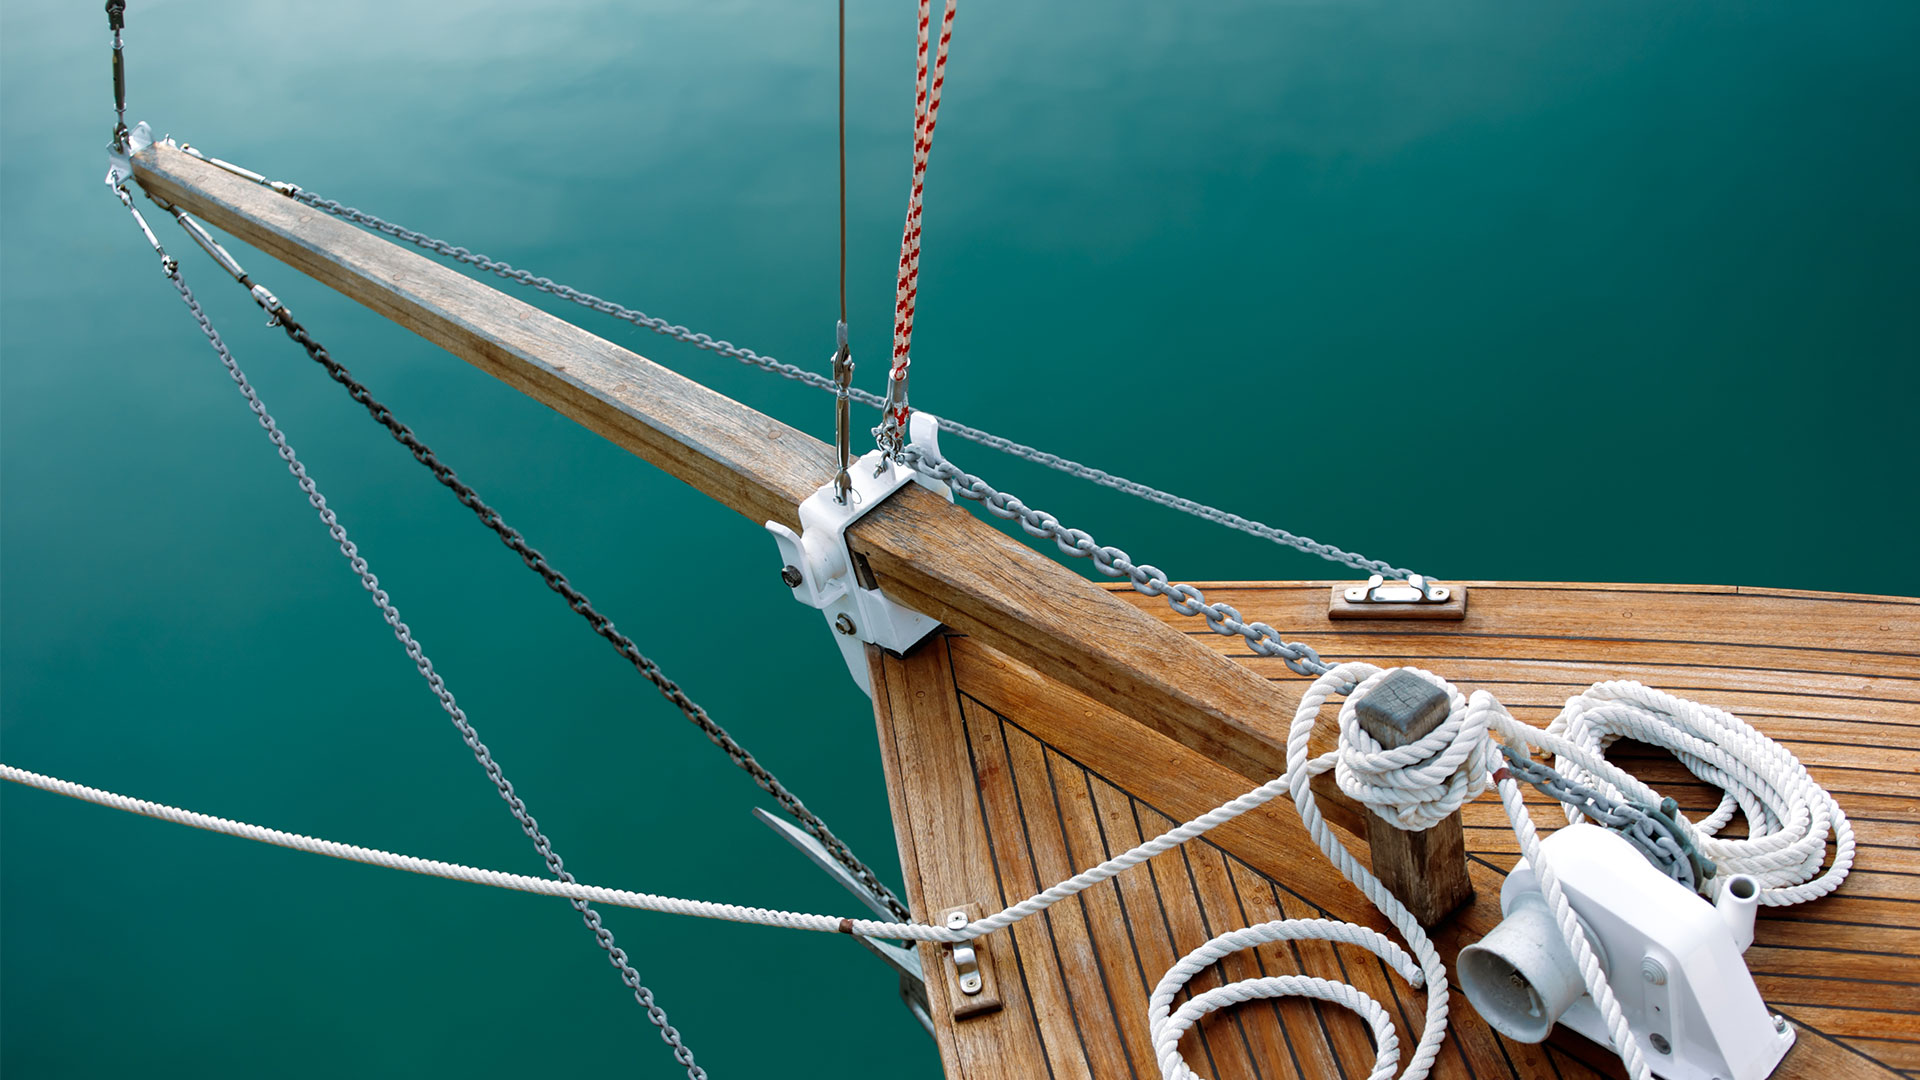 The sailing basics you need to know if you want to learn to sail